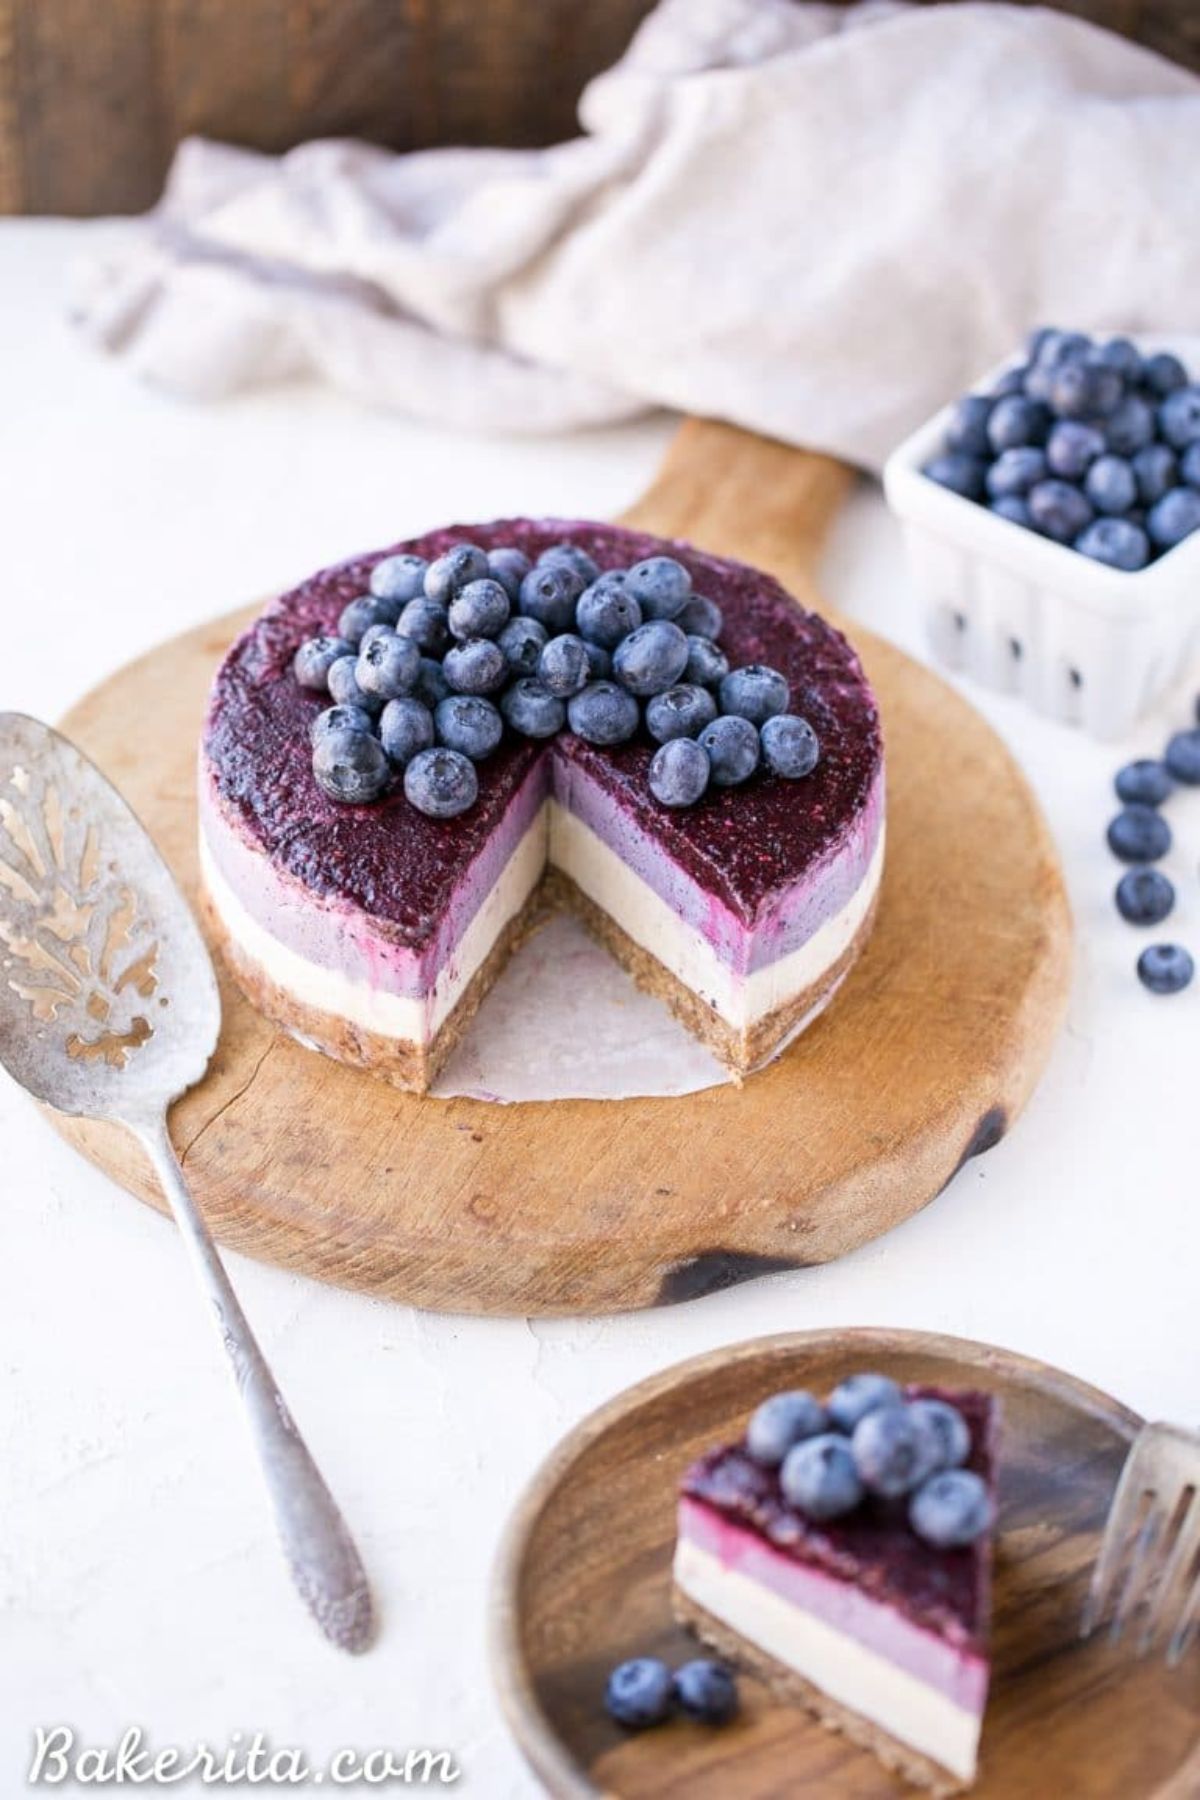 a wooden platter with a layered blueberry cheesecake on it, topped with frsh blueberries. A cake slice is next to it